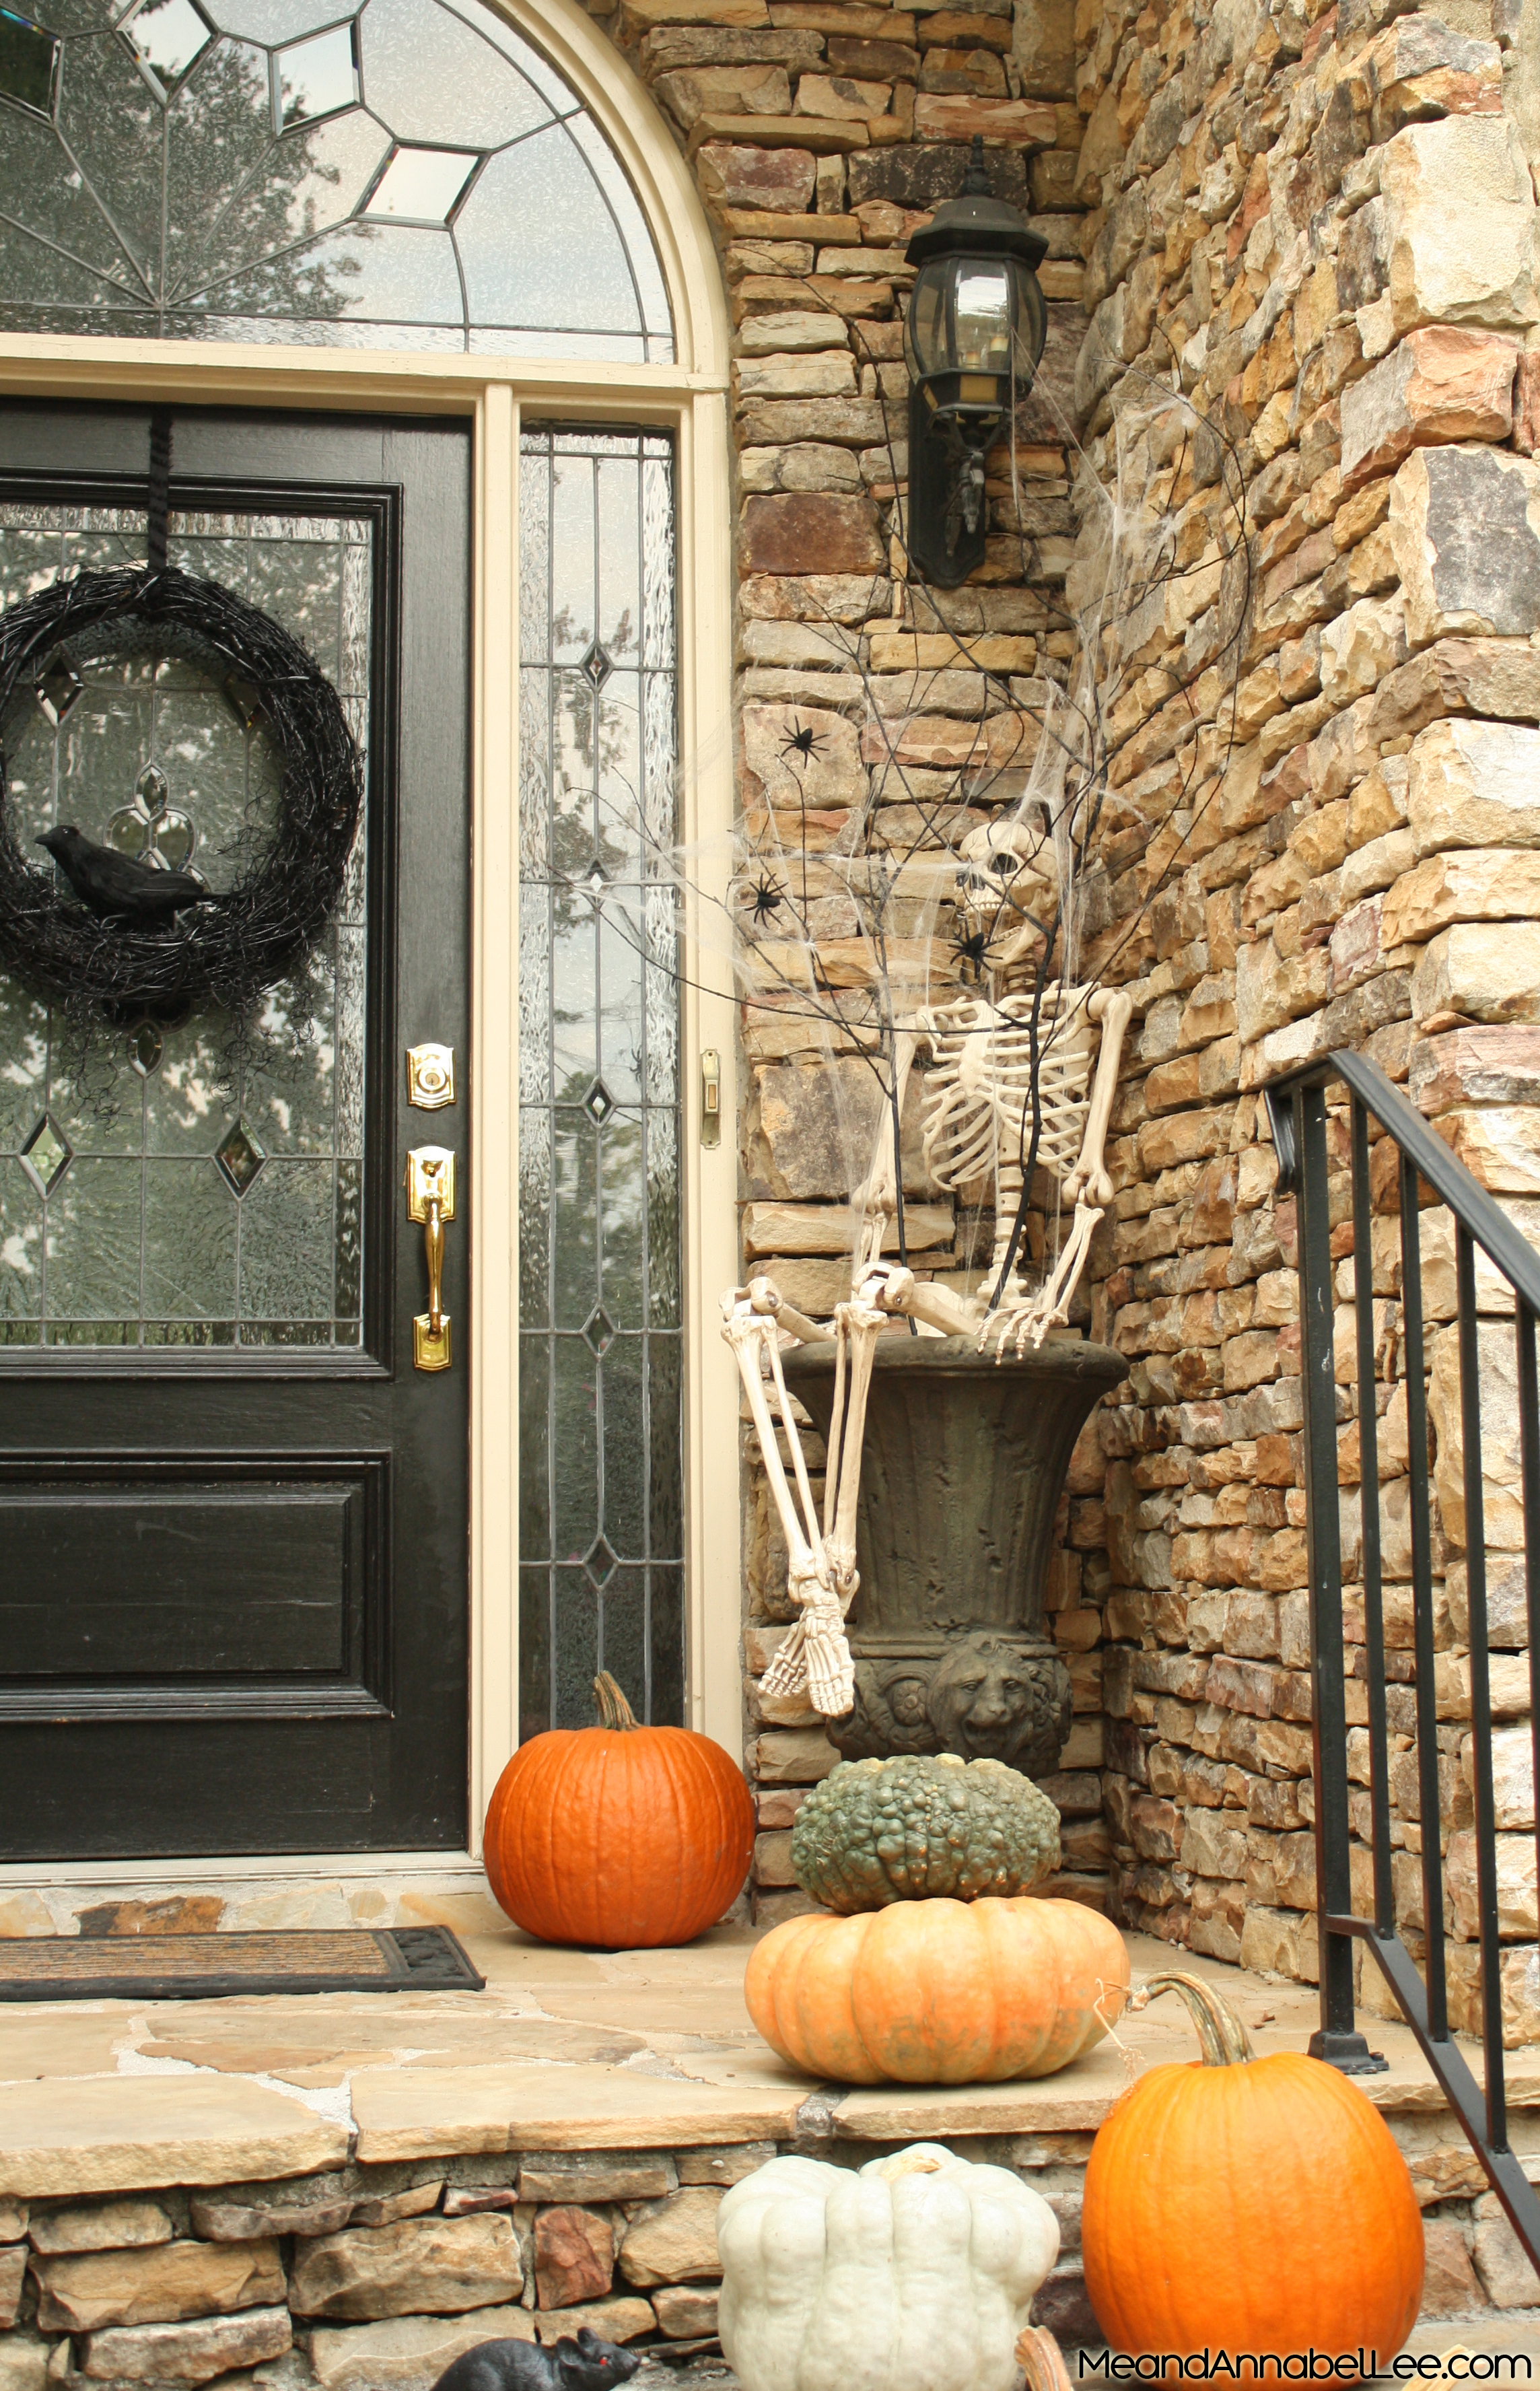 Halloween Front Entry Decor - Skeletons, Pumpkins, Spider Web Branches, and Crow Grapevine Wreath - www.MeandAnnabelLee.com